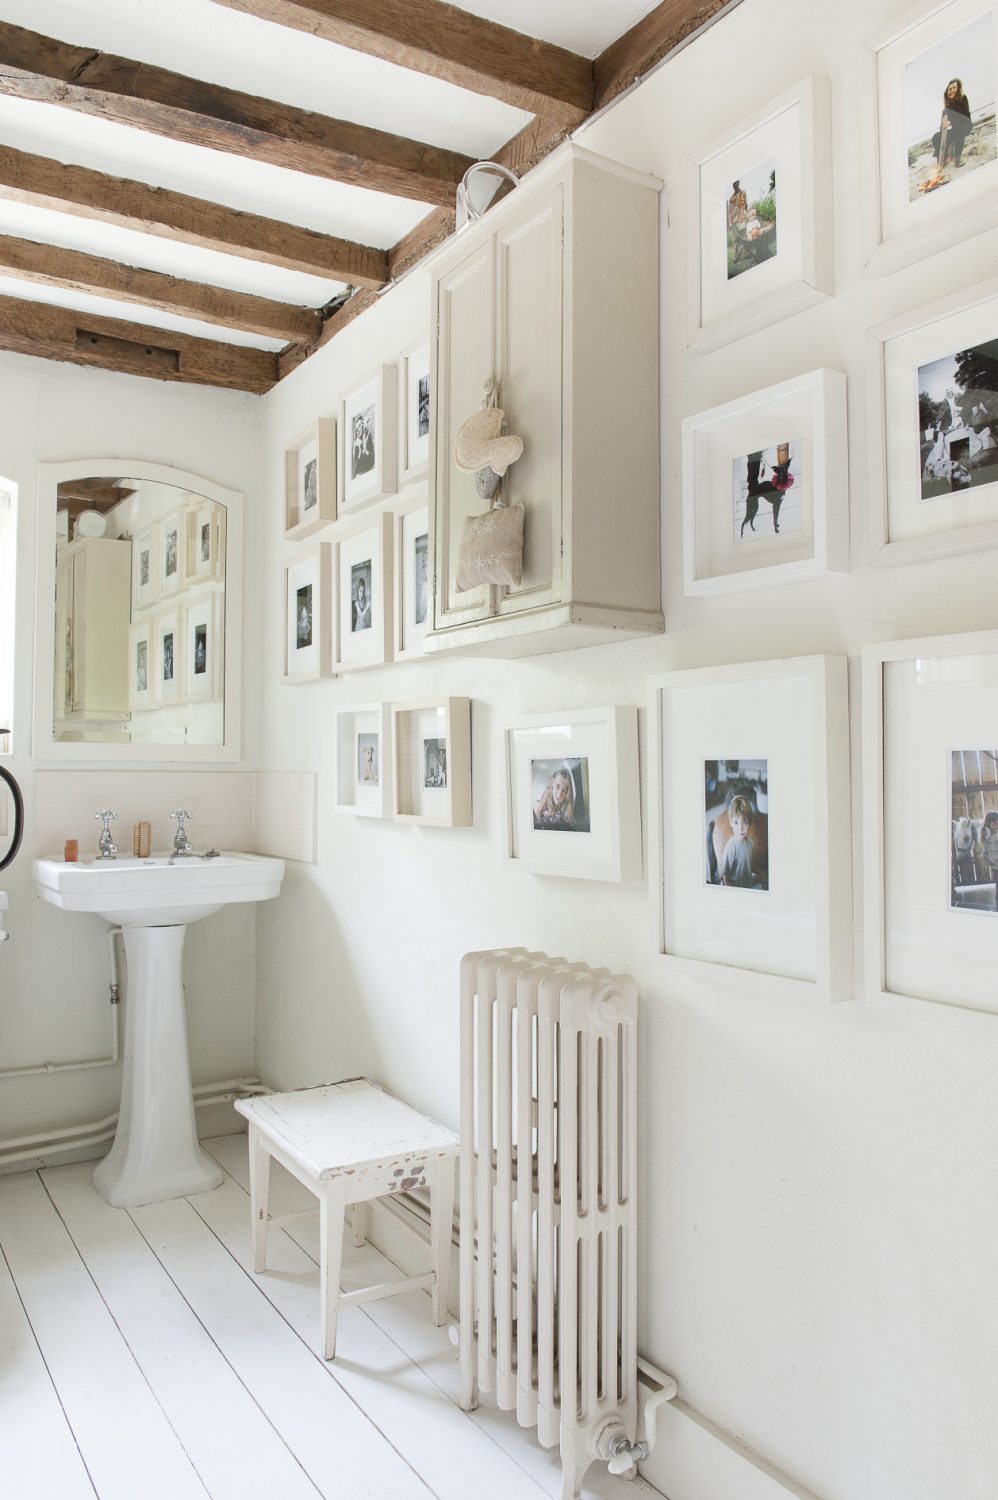 Family photographs cover the walls of the pure white bathroom